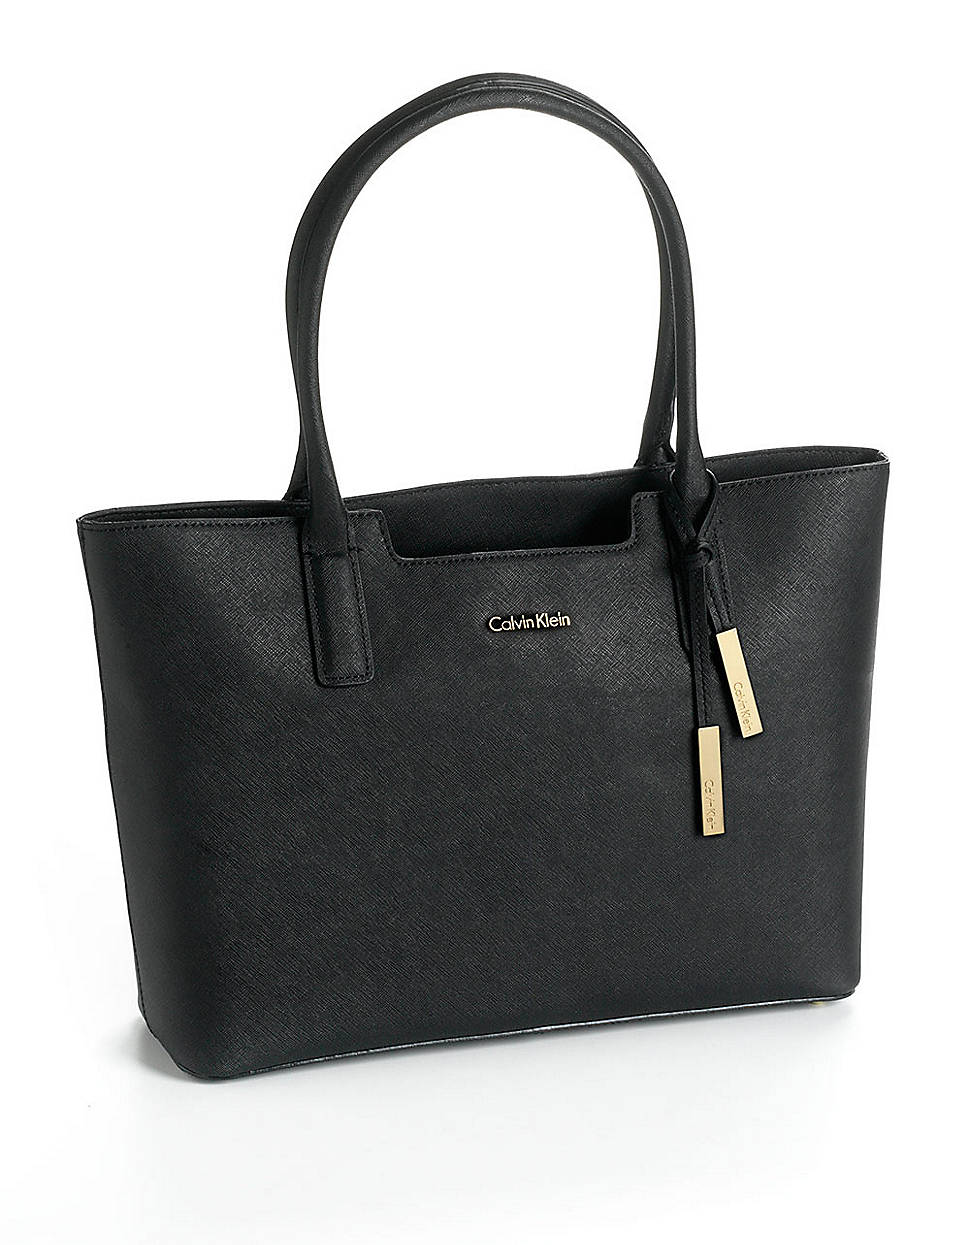 Calvin Klein Leather Tote Bag in Black | Lyst